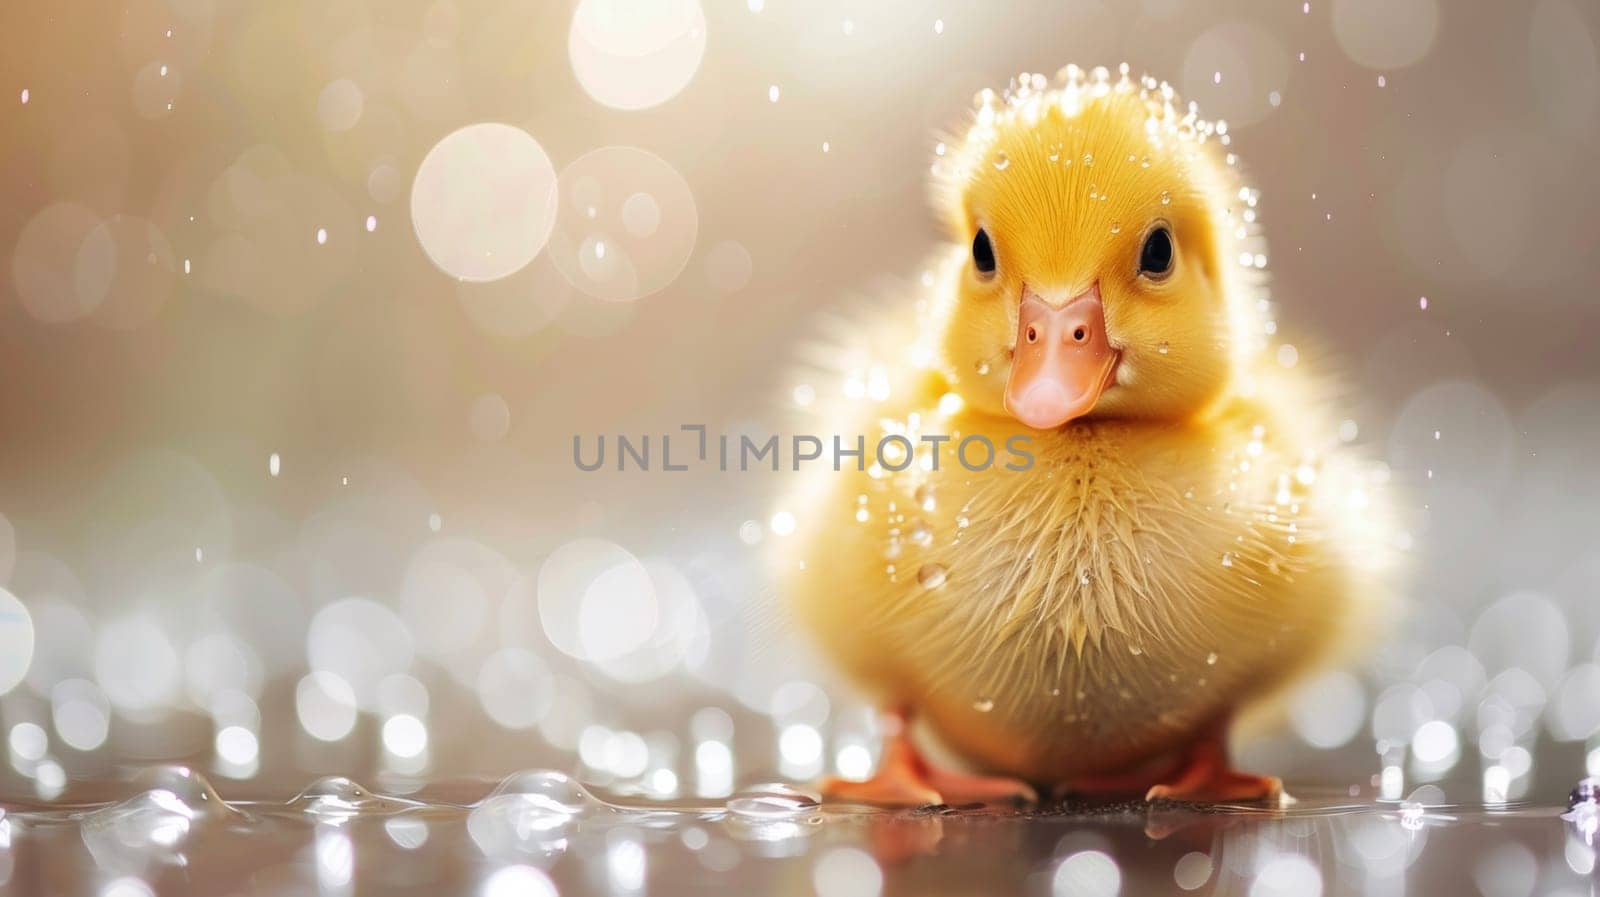 A small yellow duckling sitting on a wet surface with water droplets, AI by starush